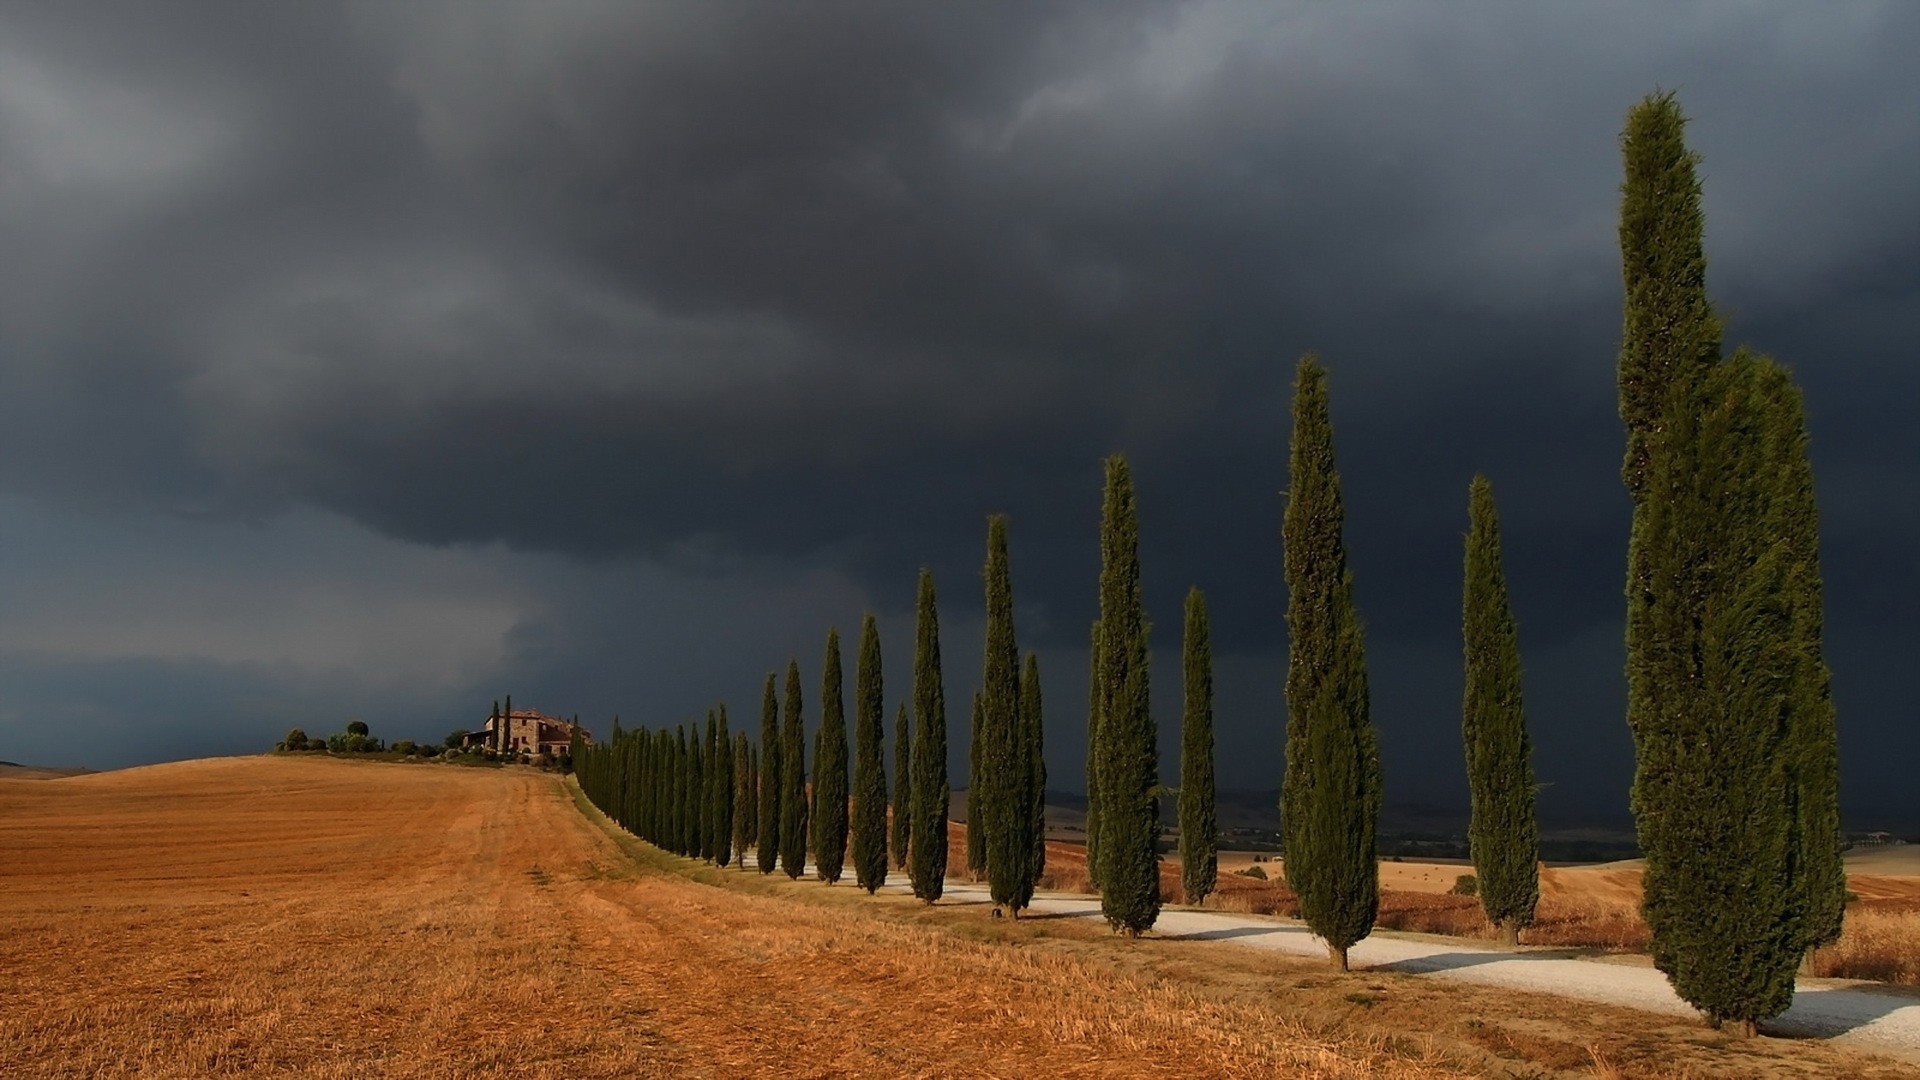 General 1920x1080 landscape clouds storm Italy trees road field house hills outdoors sky